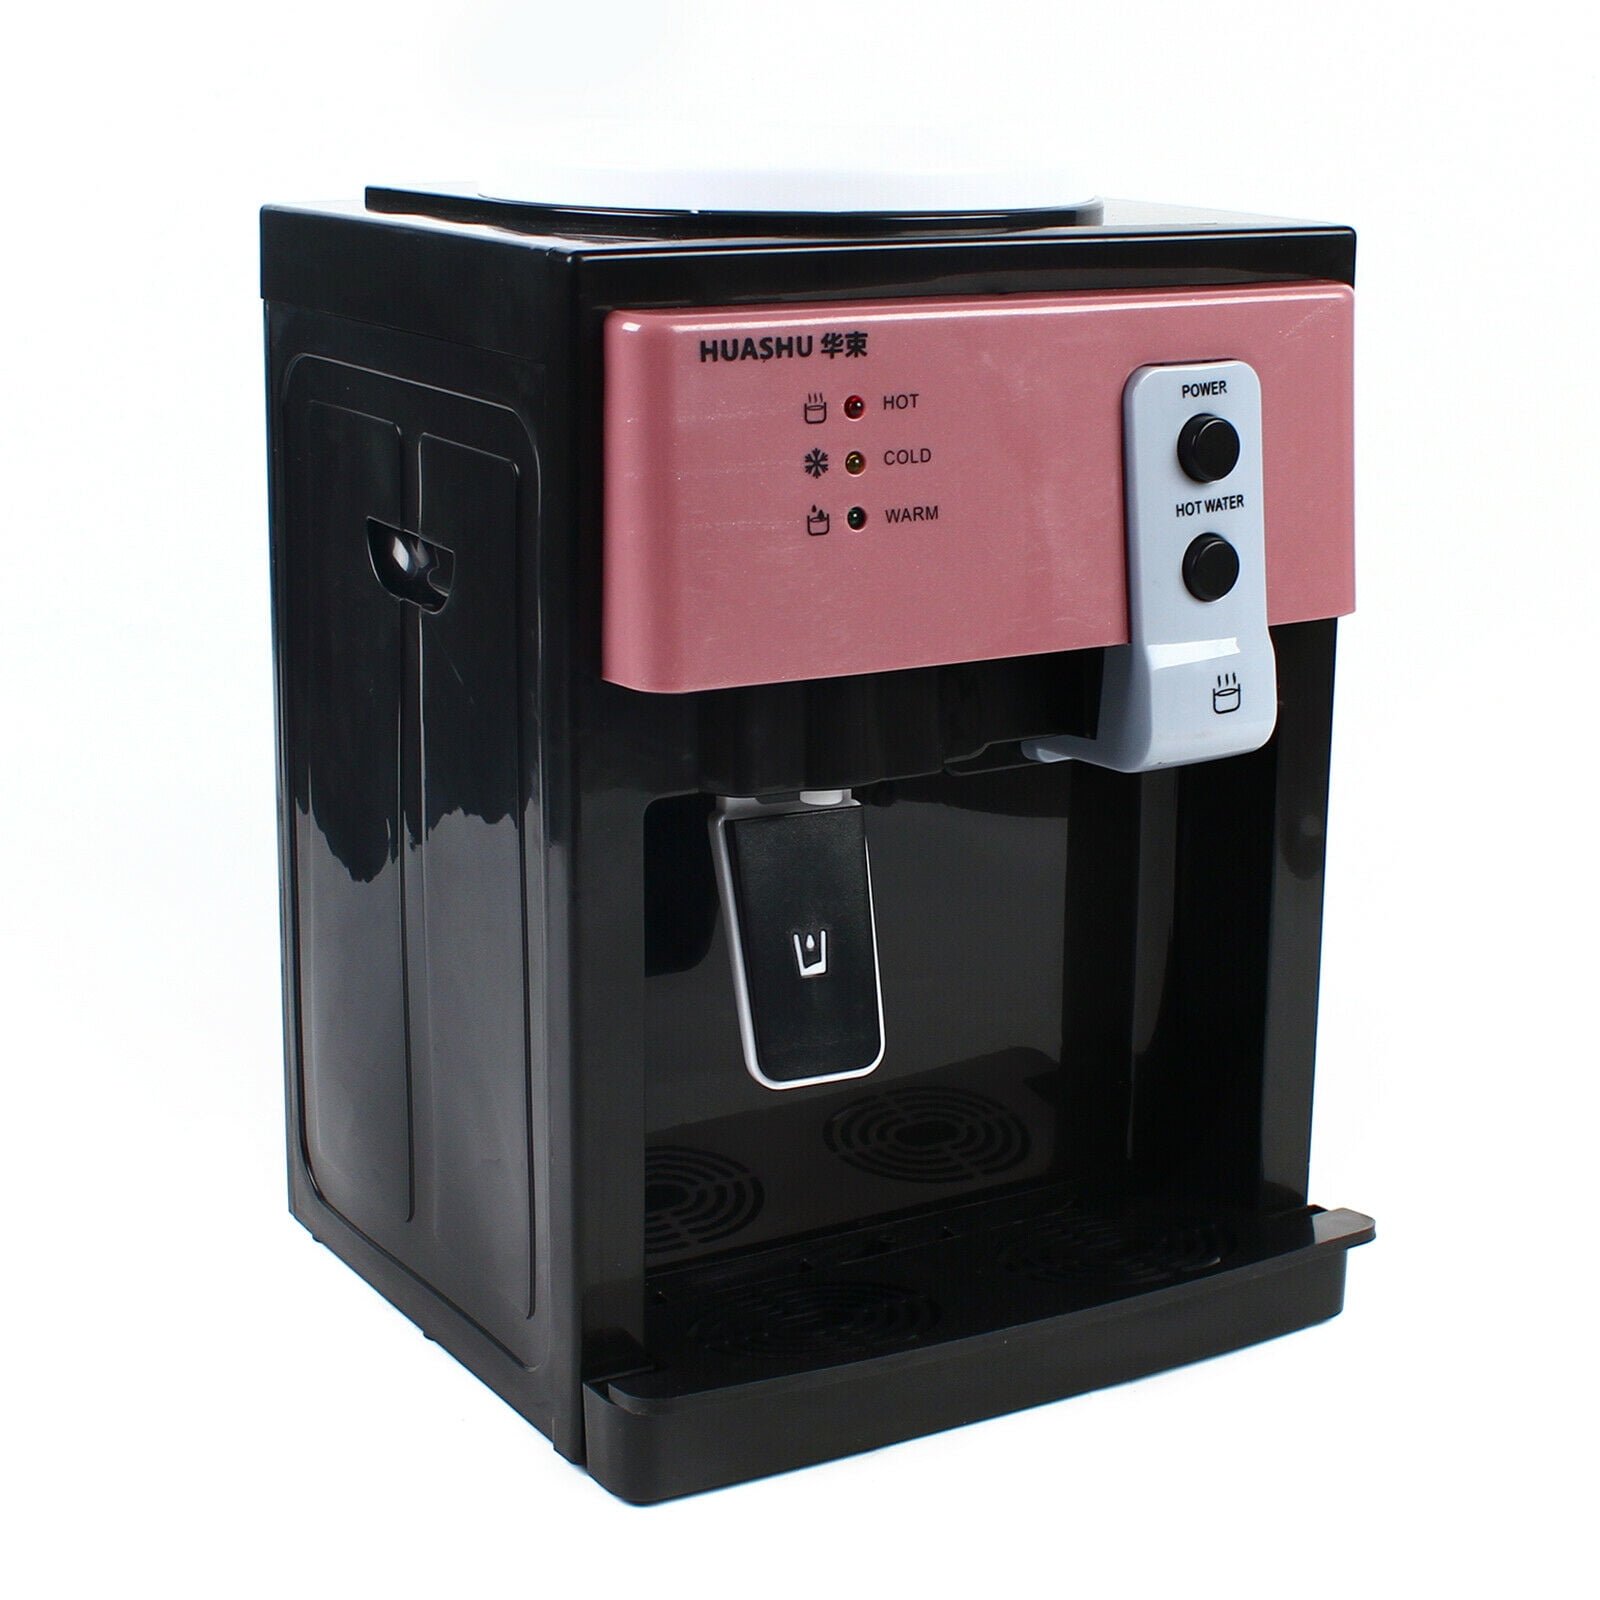 Countertop Beverage Dispensers - Midwest Home